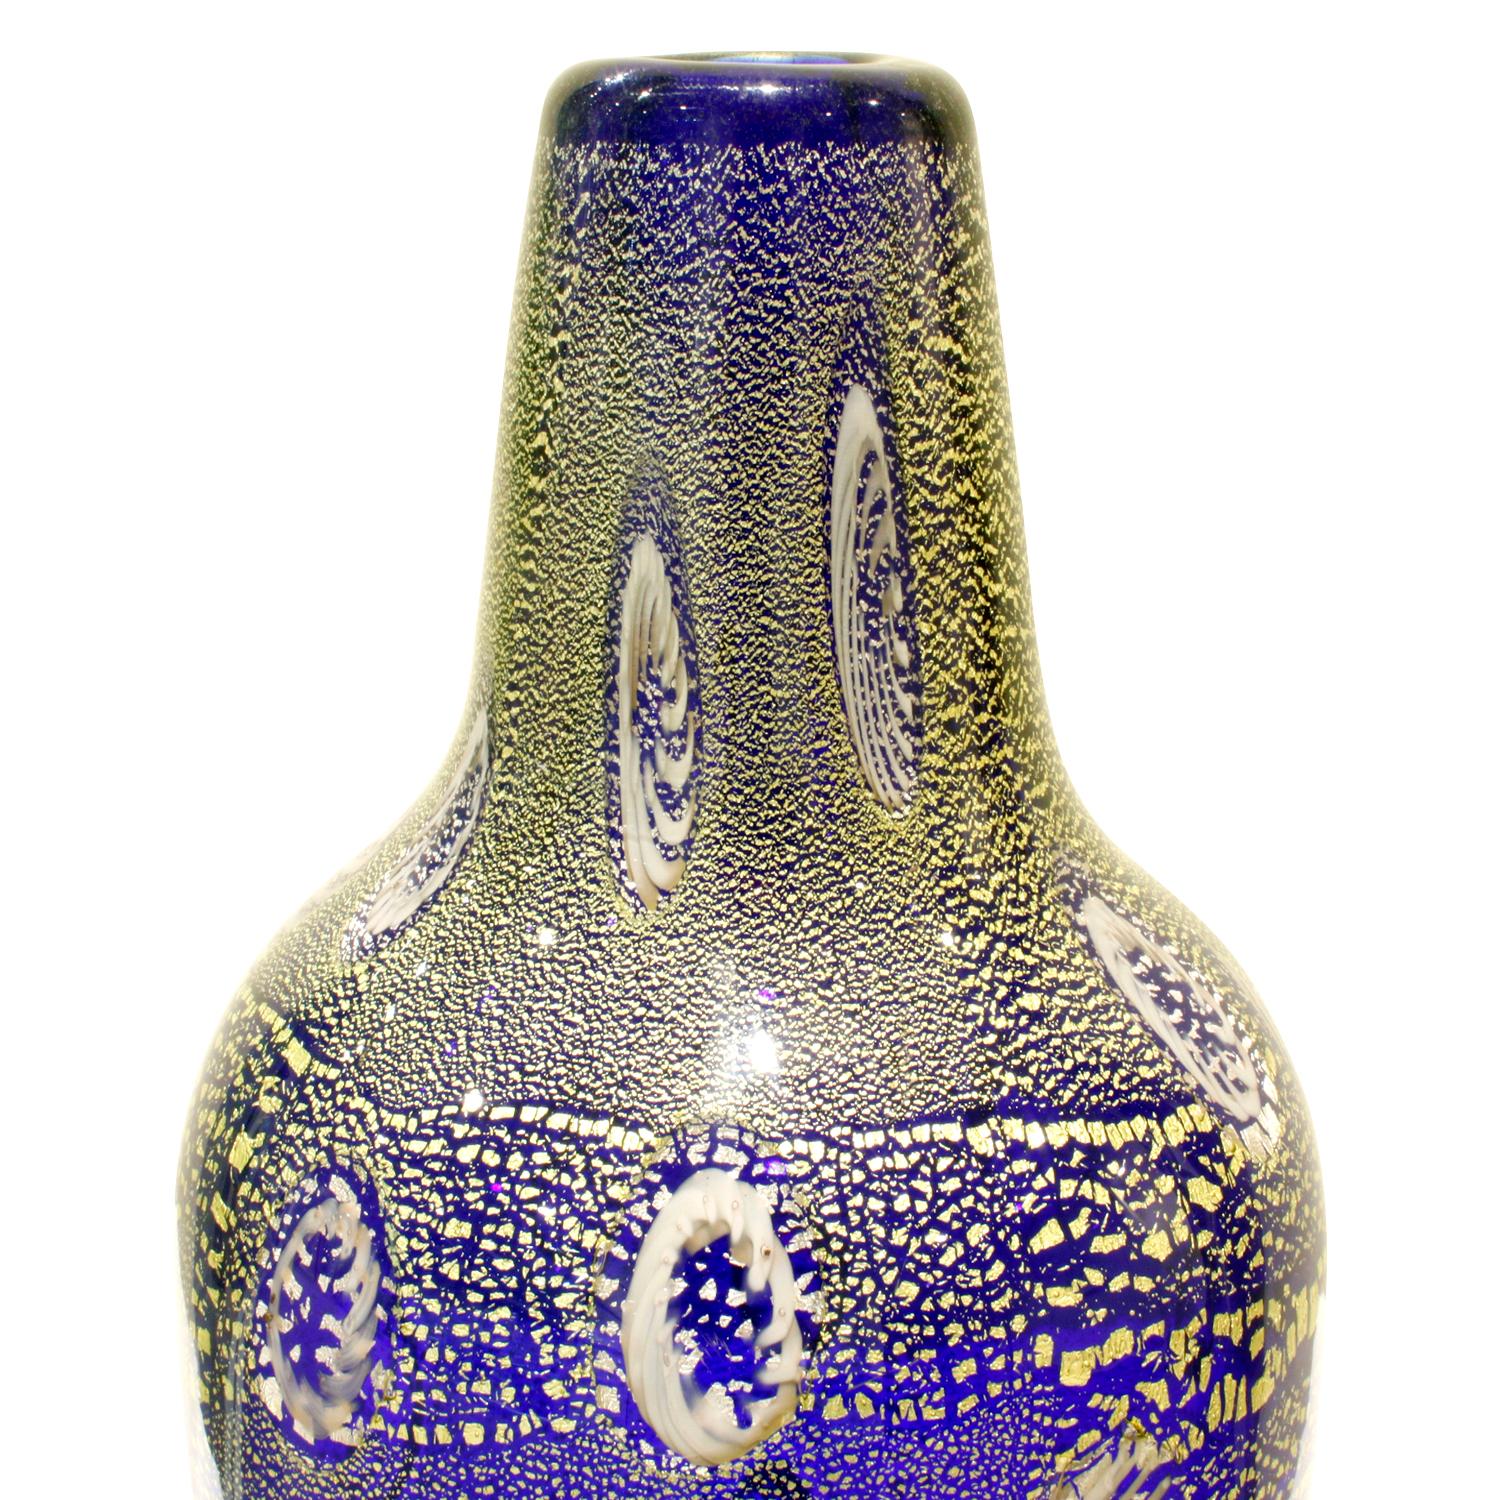 Hand blown blue glass vase with murrhines and gold foil by Giulio Radi for Arte Vetraria Muranese (A.V.E.M.), Murano Italy, circa 1950. Radi's works are beautiful and rare. The gold foil in the glass give it a jewel-like quality.

Reference:
